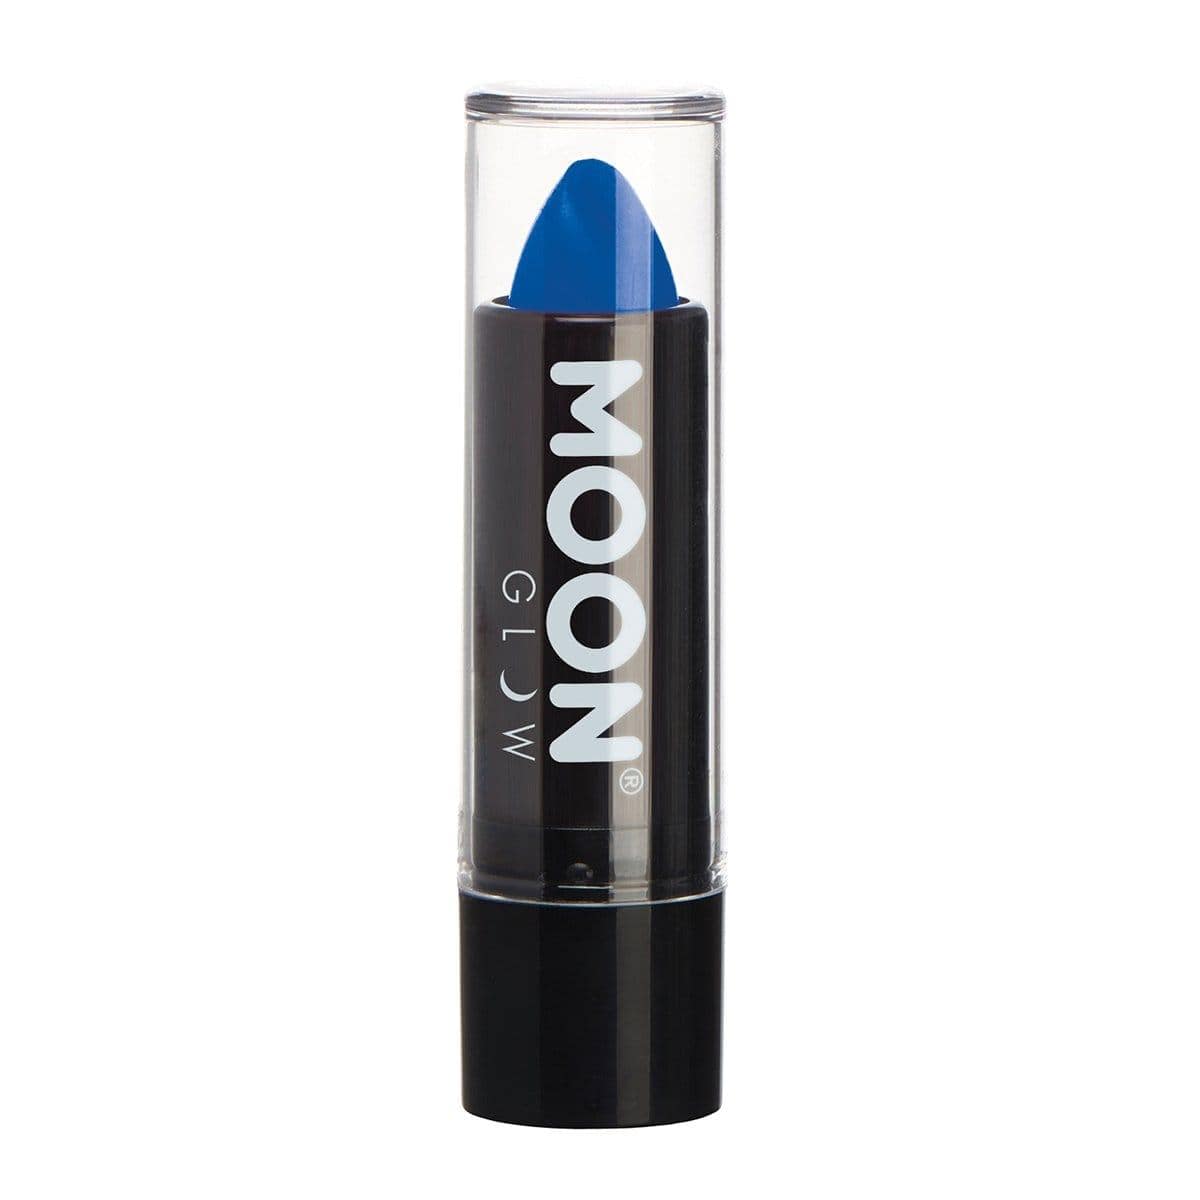 Buy Costume Accessories Moon blue neon UV lipstick sold at Party Expert